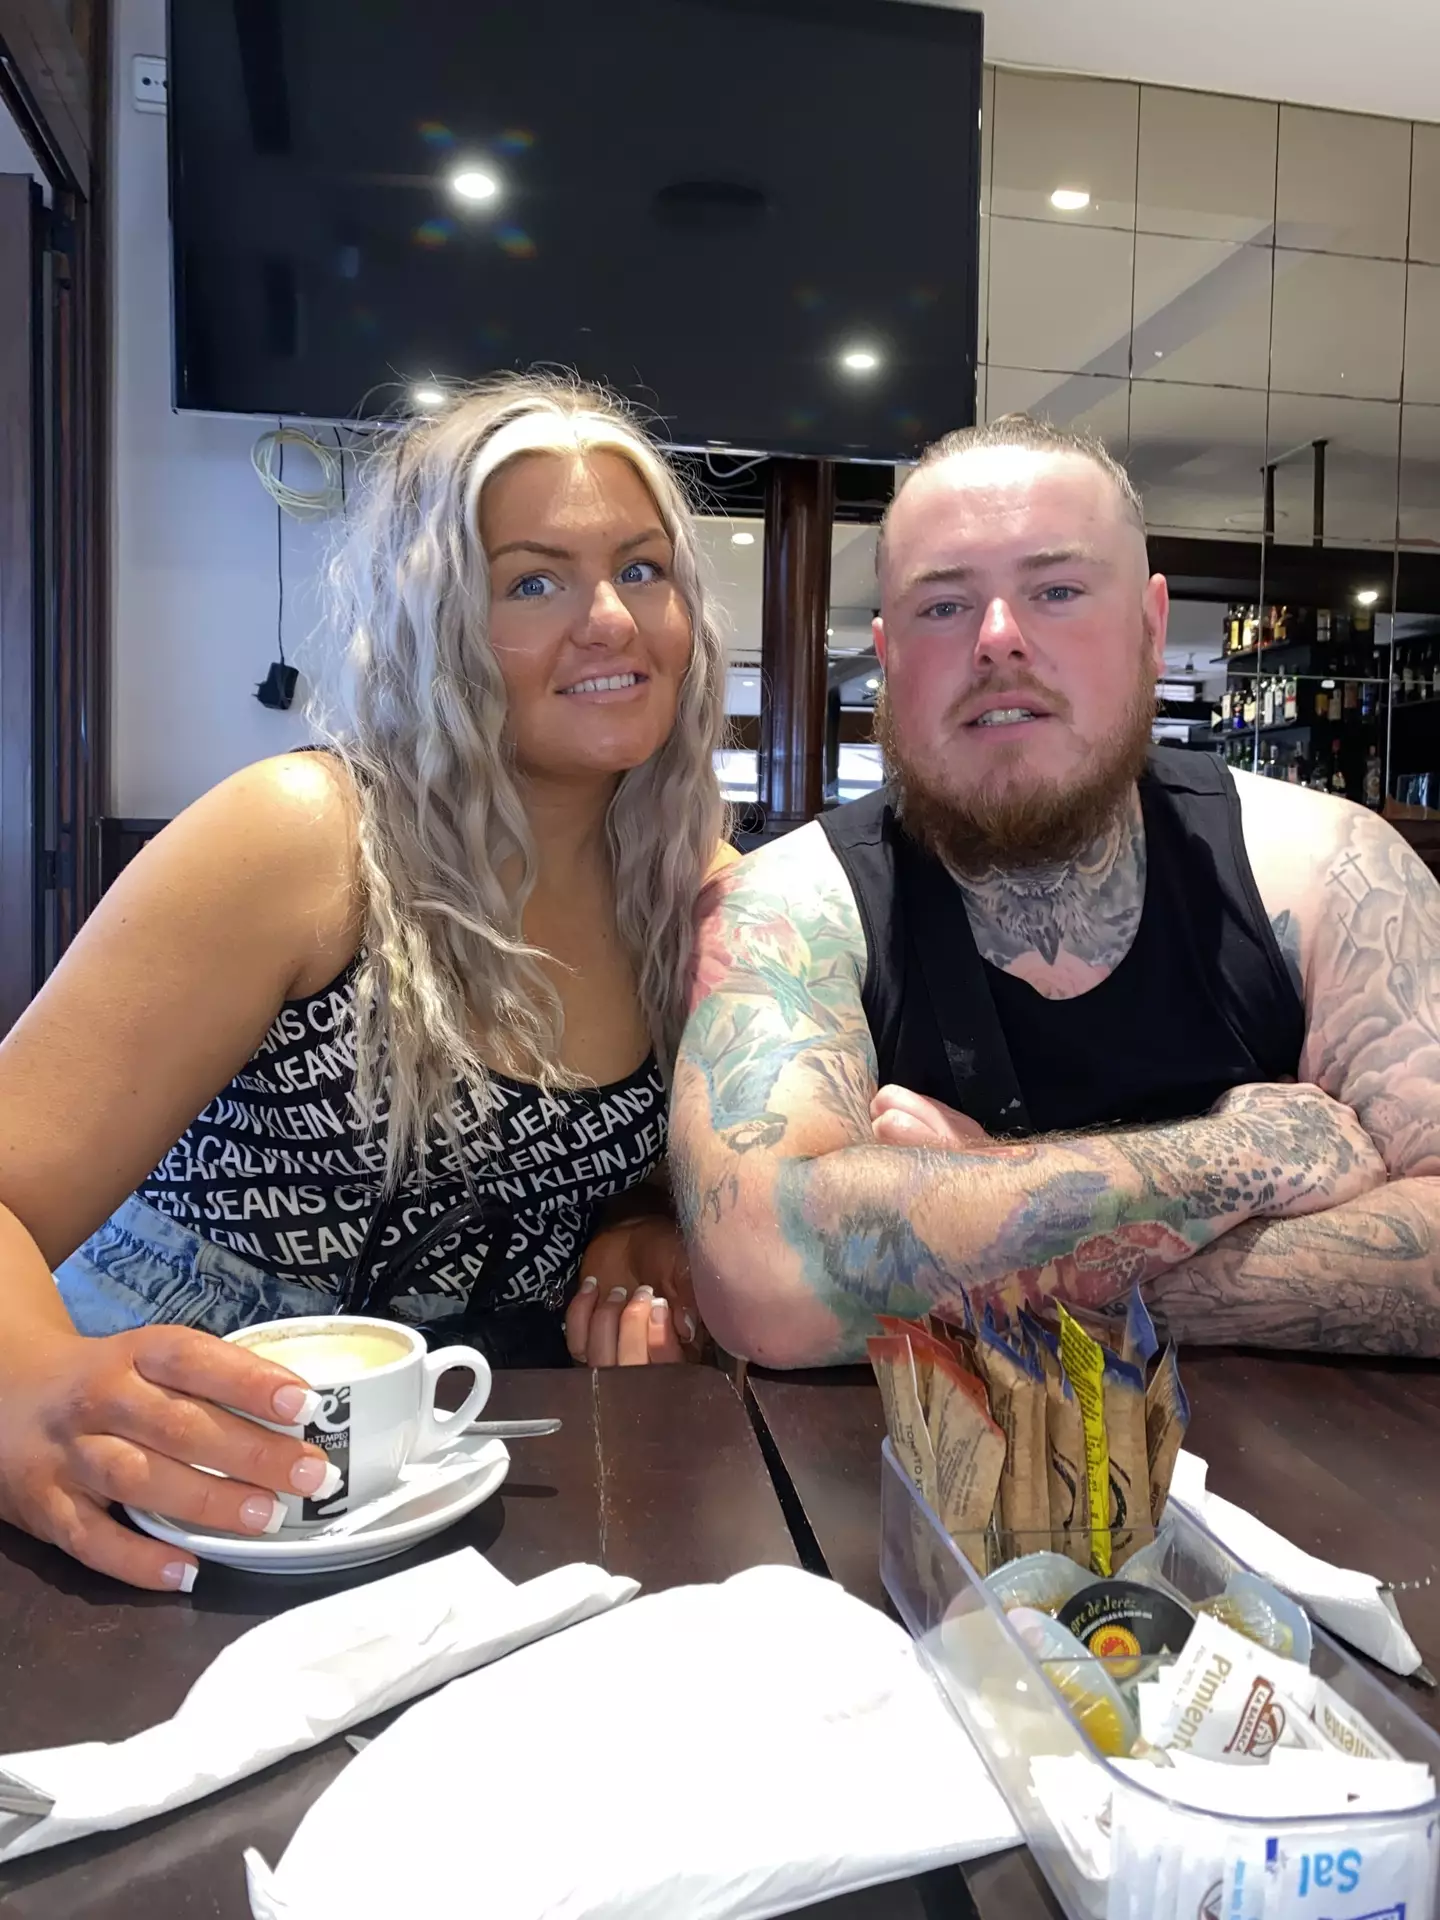 Their dream wedding was off after Jet2 were forced to cancel their flight.